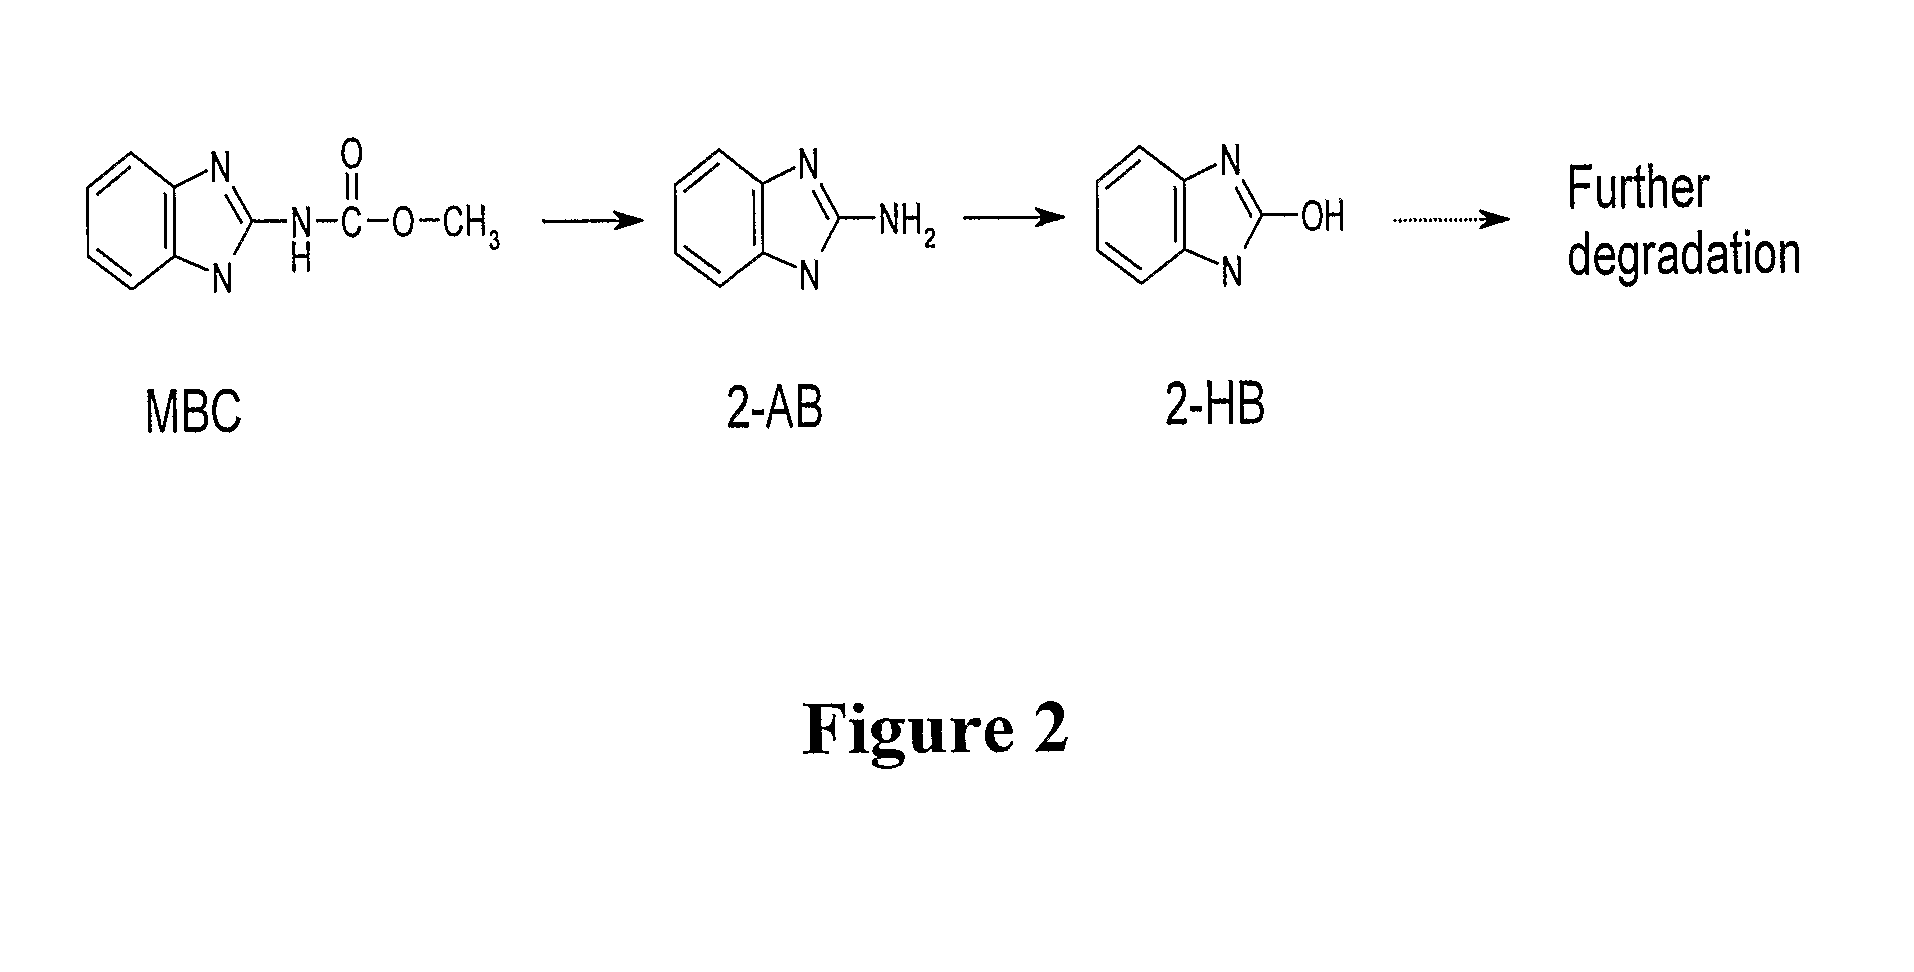 Methods for degrading toxic compounds